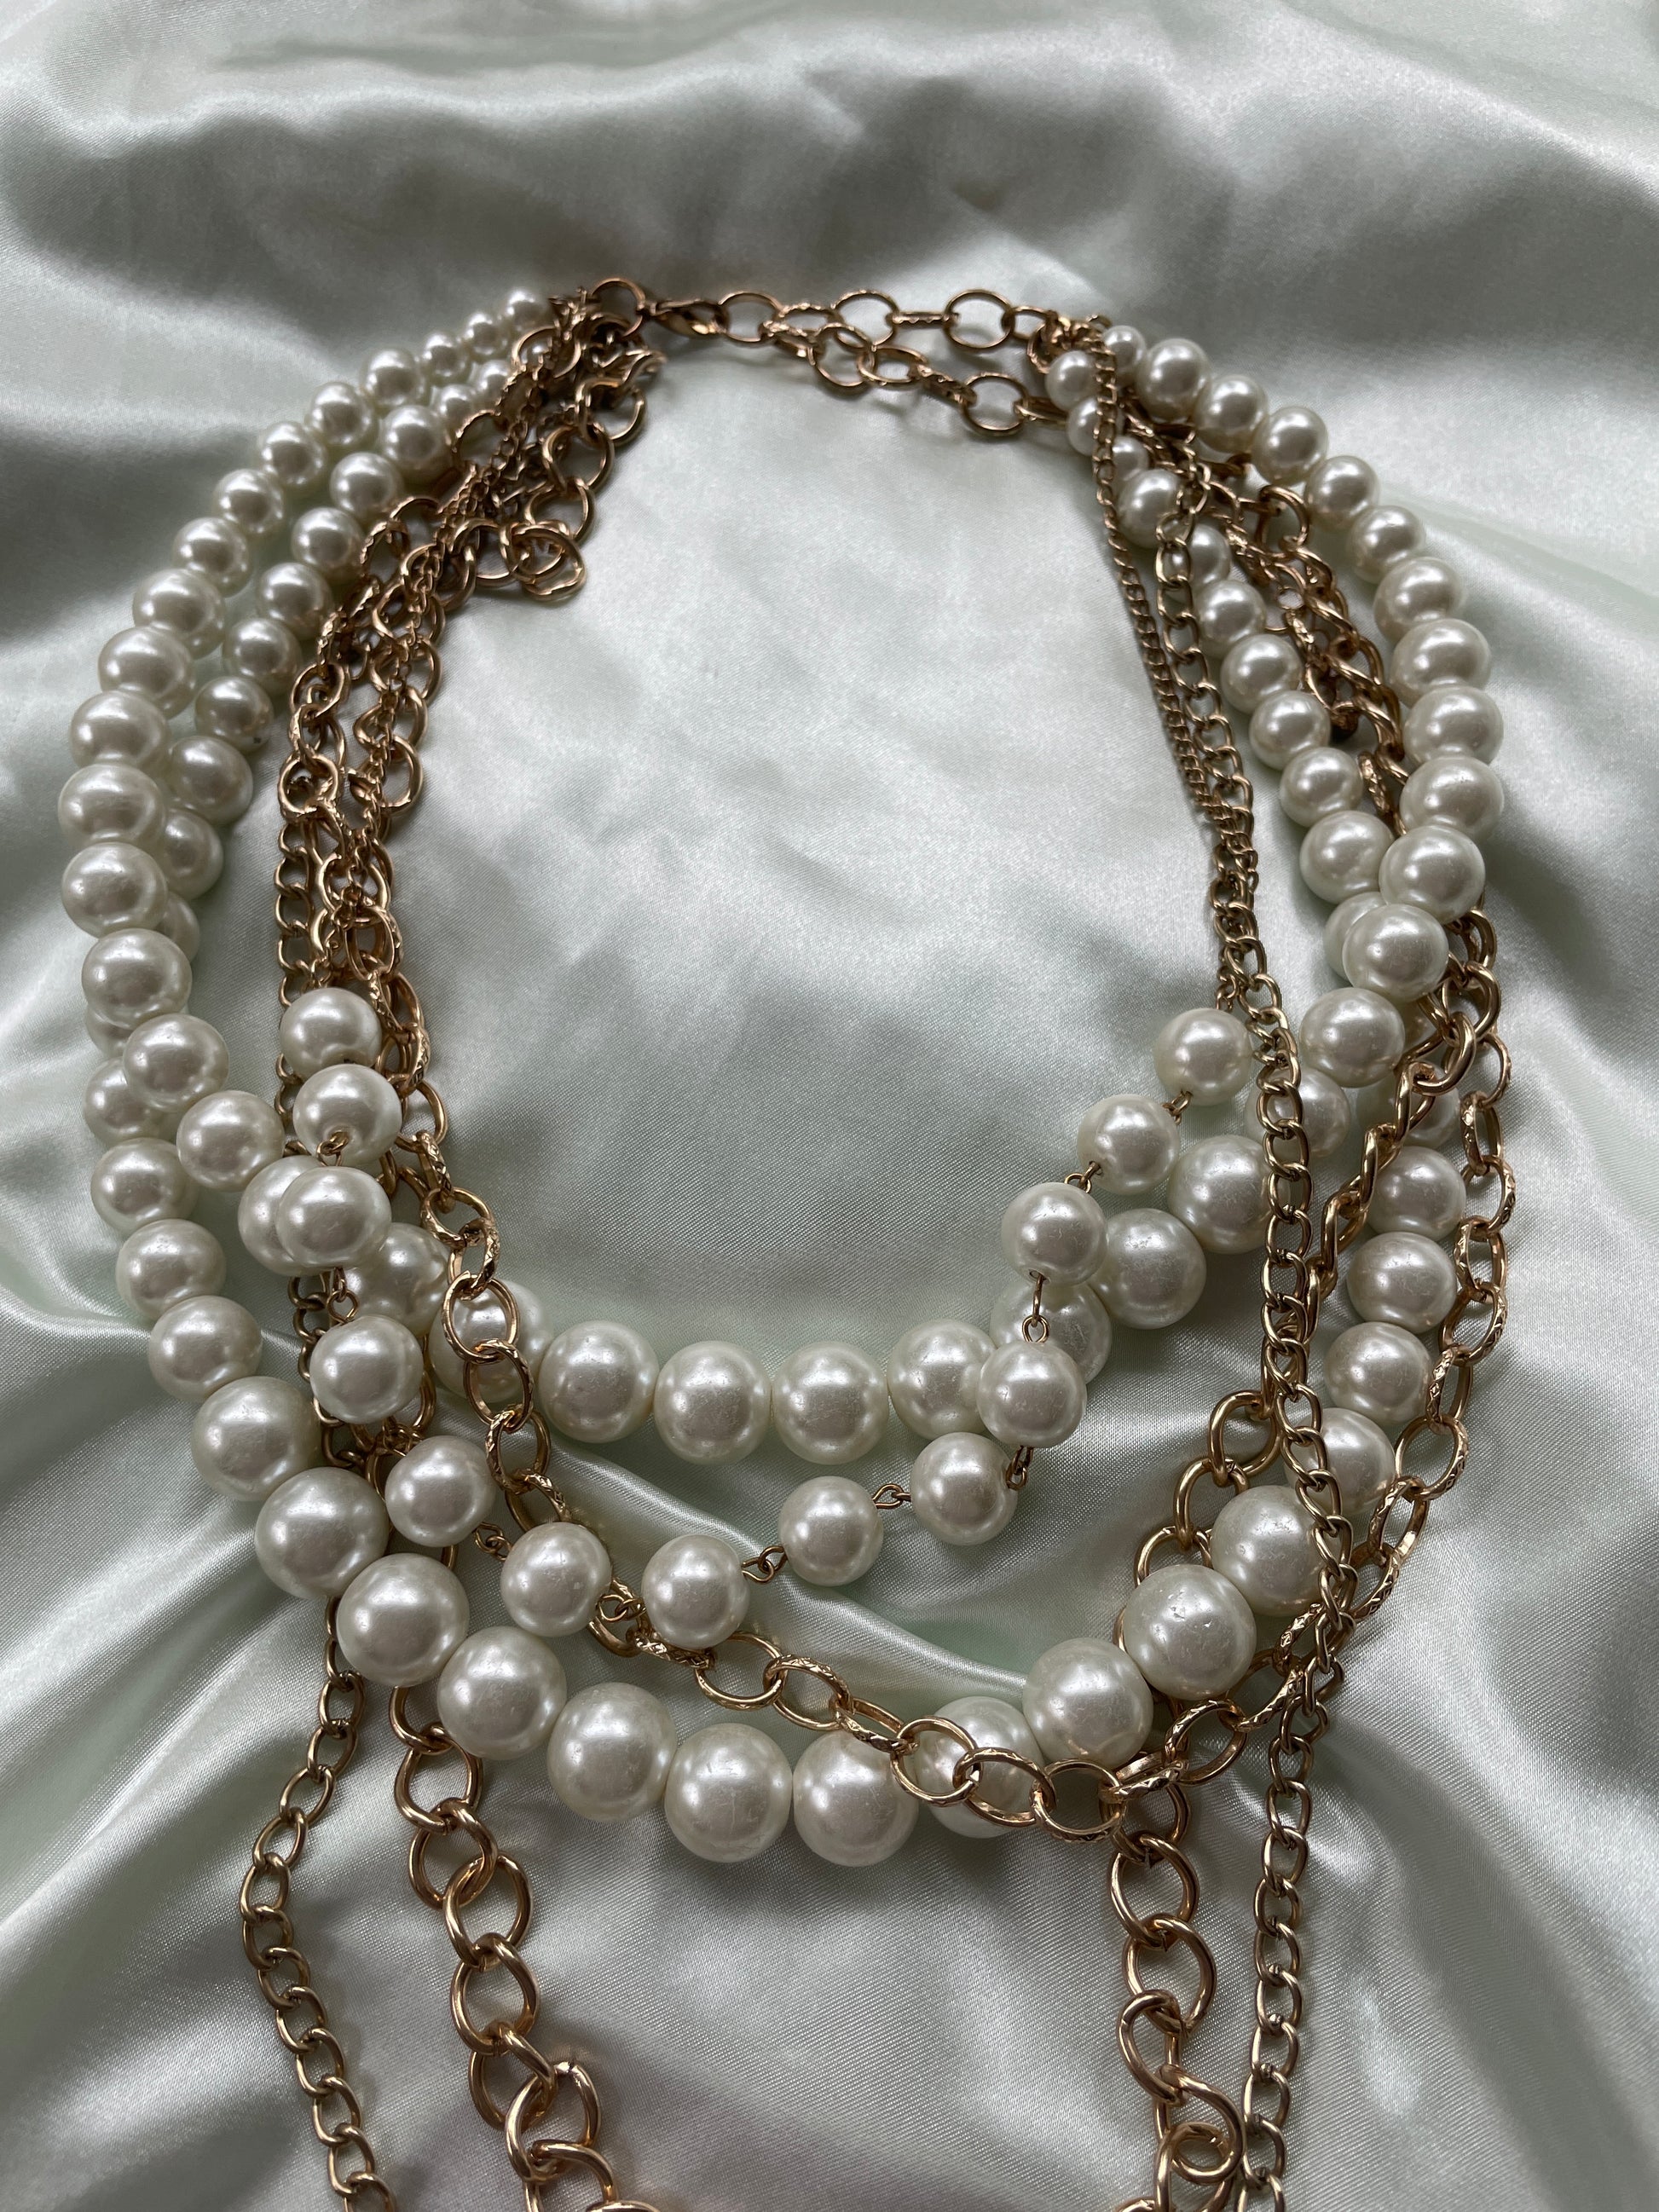  Multiple Layered Chains Faux Pearl 2000 Costume Statement Necklace